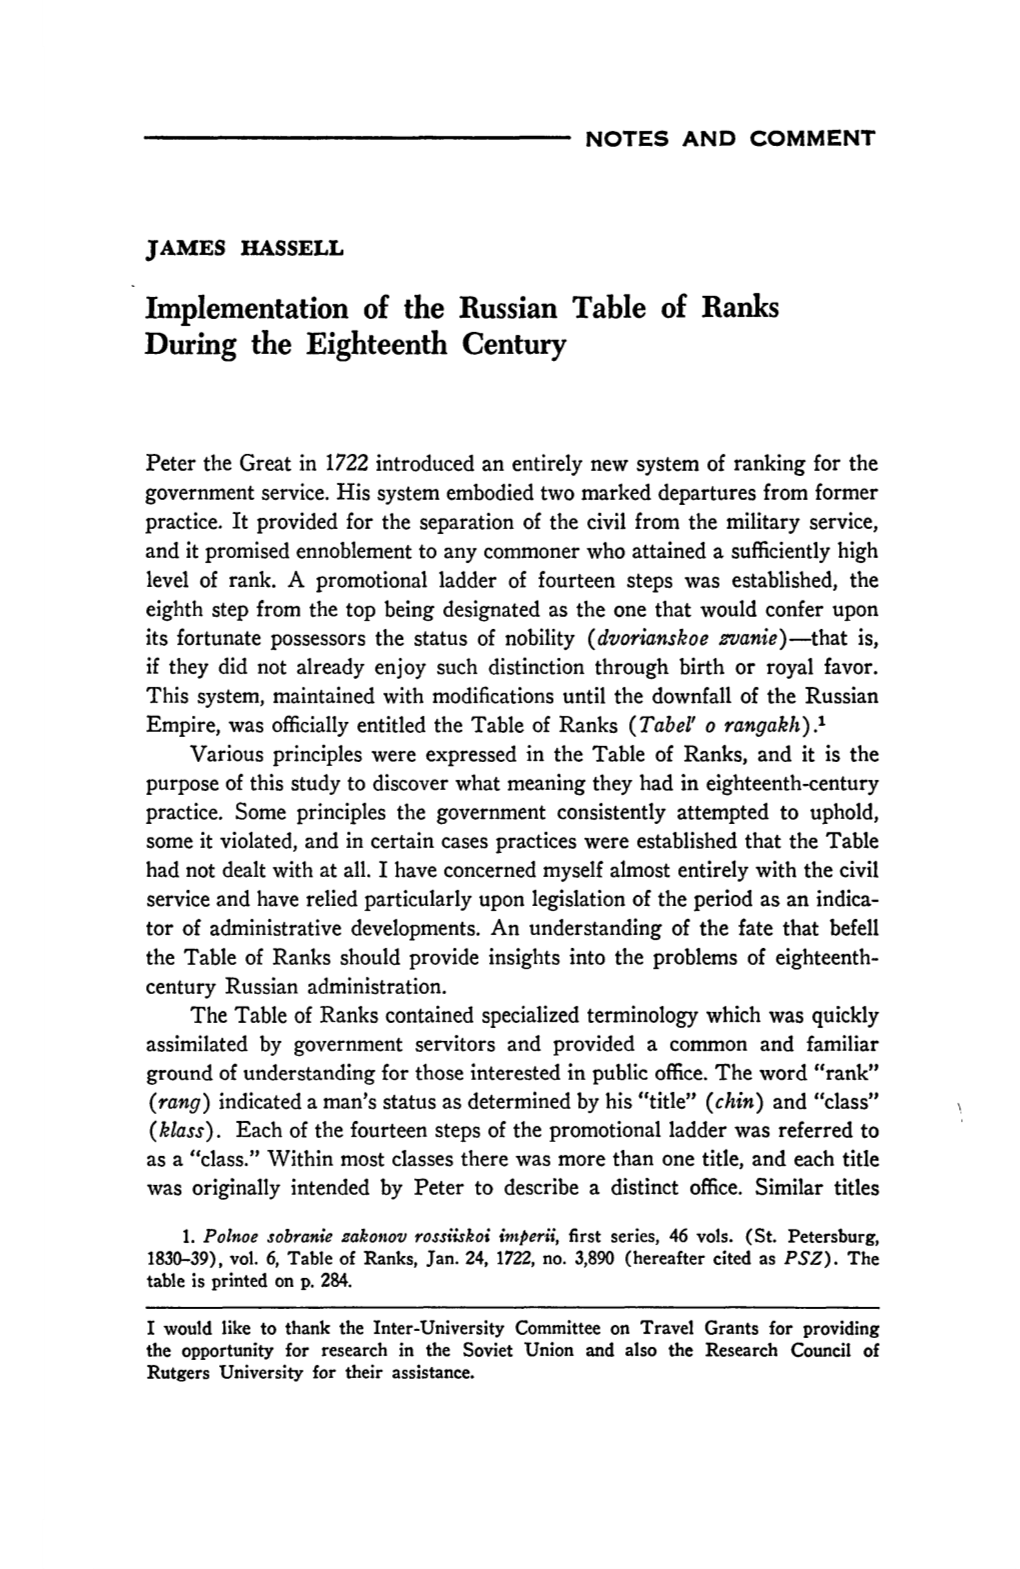 Implementation of the Russian Table of Ranks During the Eighteenth Century